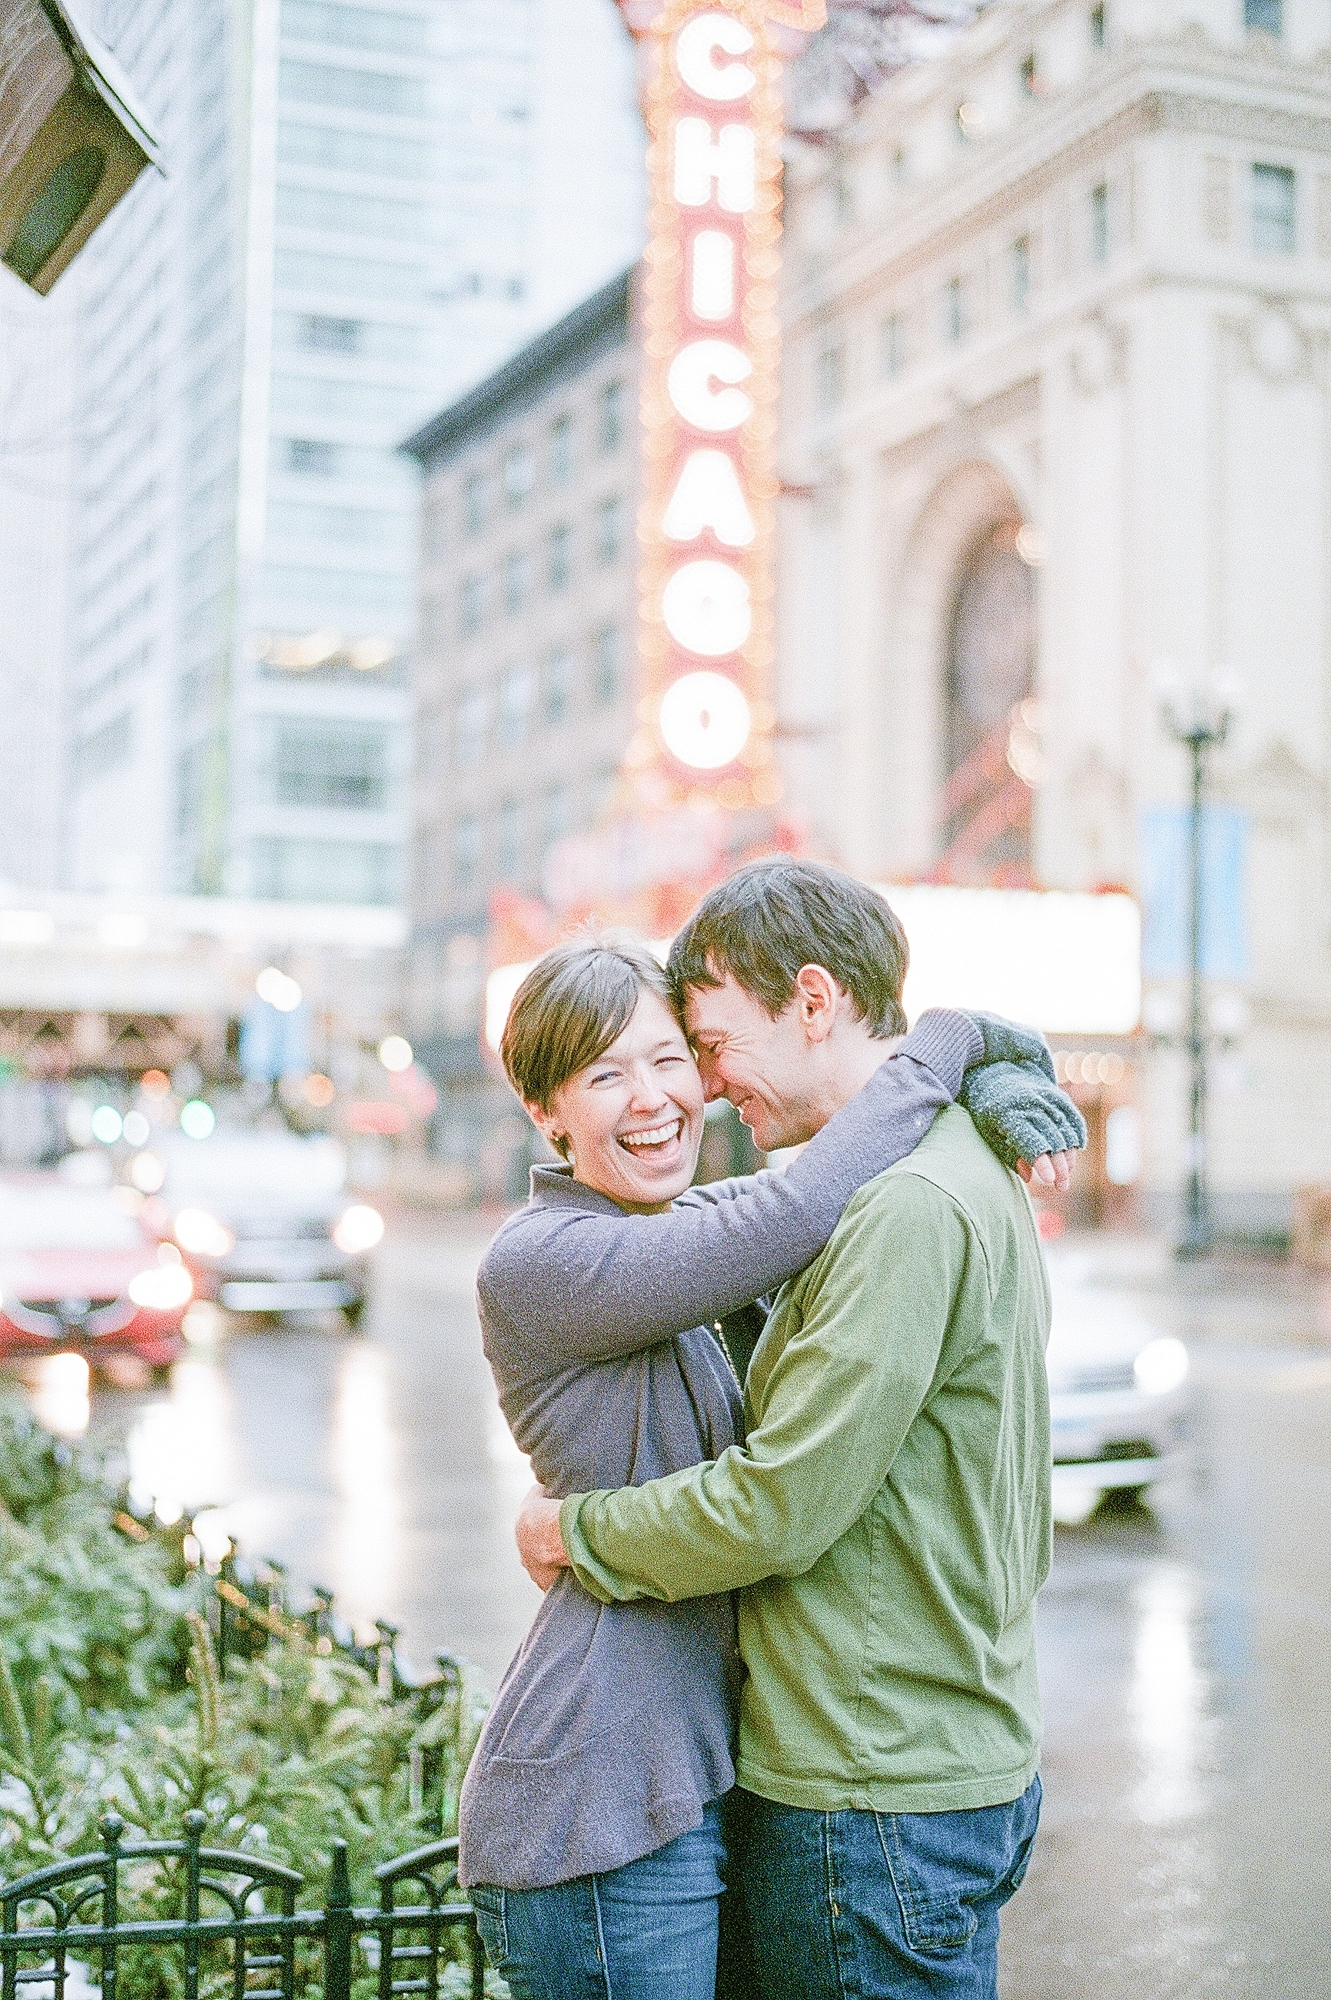 Winter Wedding Anniversary Session in Downtown Chicago by Dolly DeLong Photography